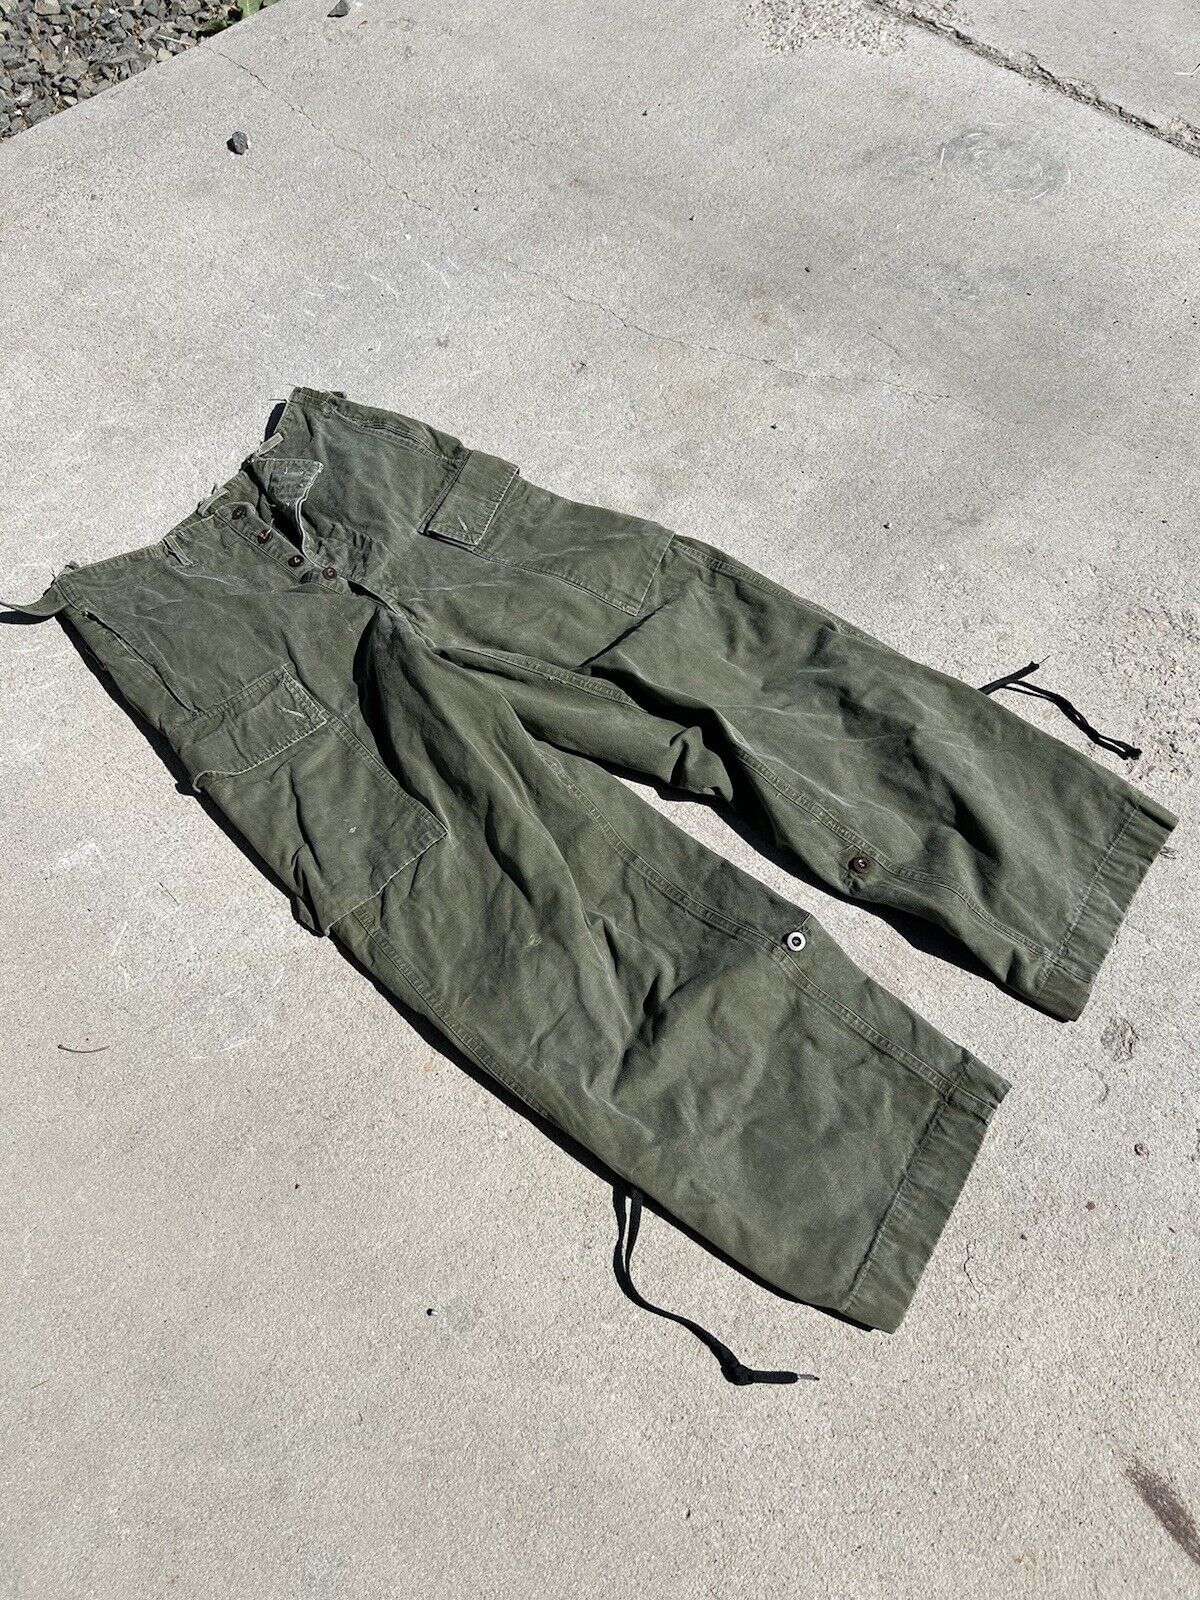 1940 men’s military trousers